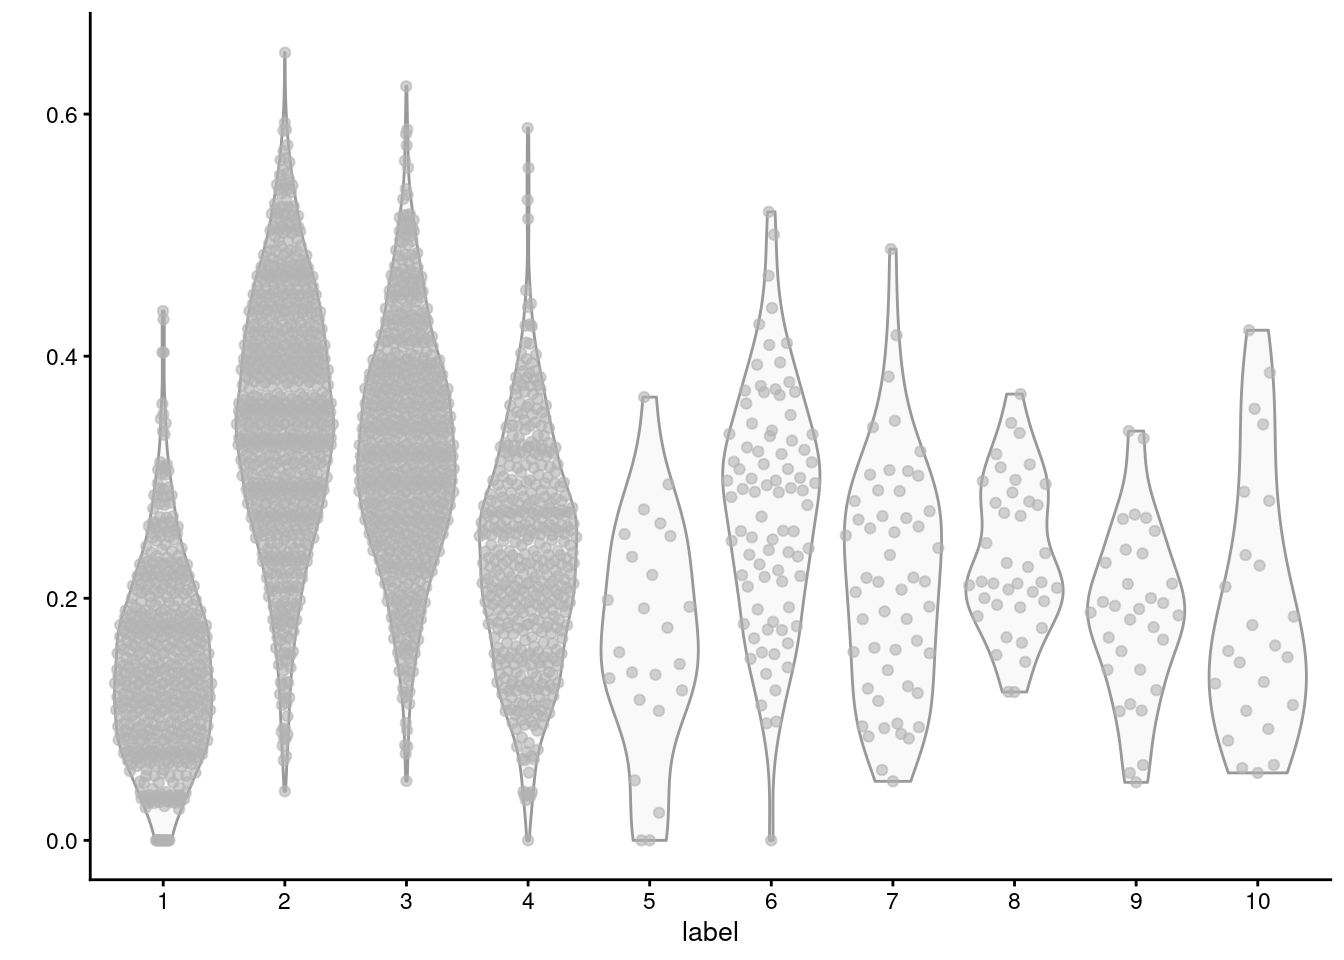 Distribution of average log-normalized expression for genes involved in triacylglycerol biosynthesis, for all cells in each cluster of the mammary gland dataset.